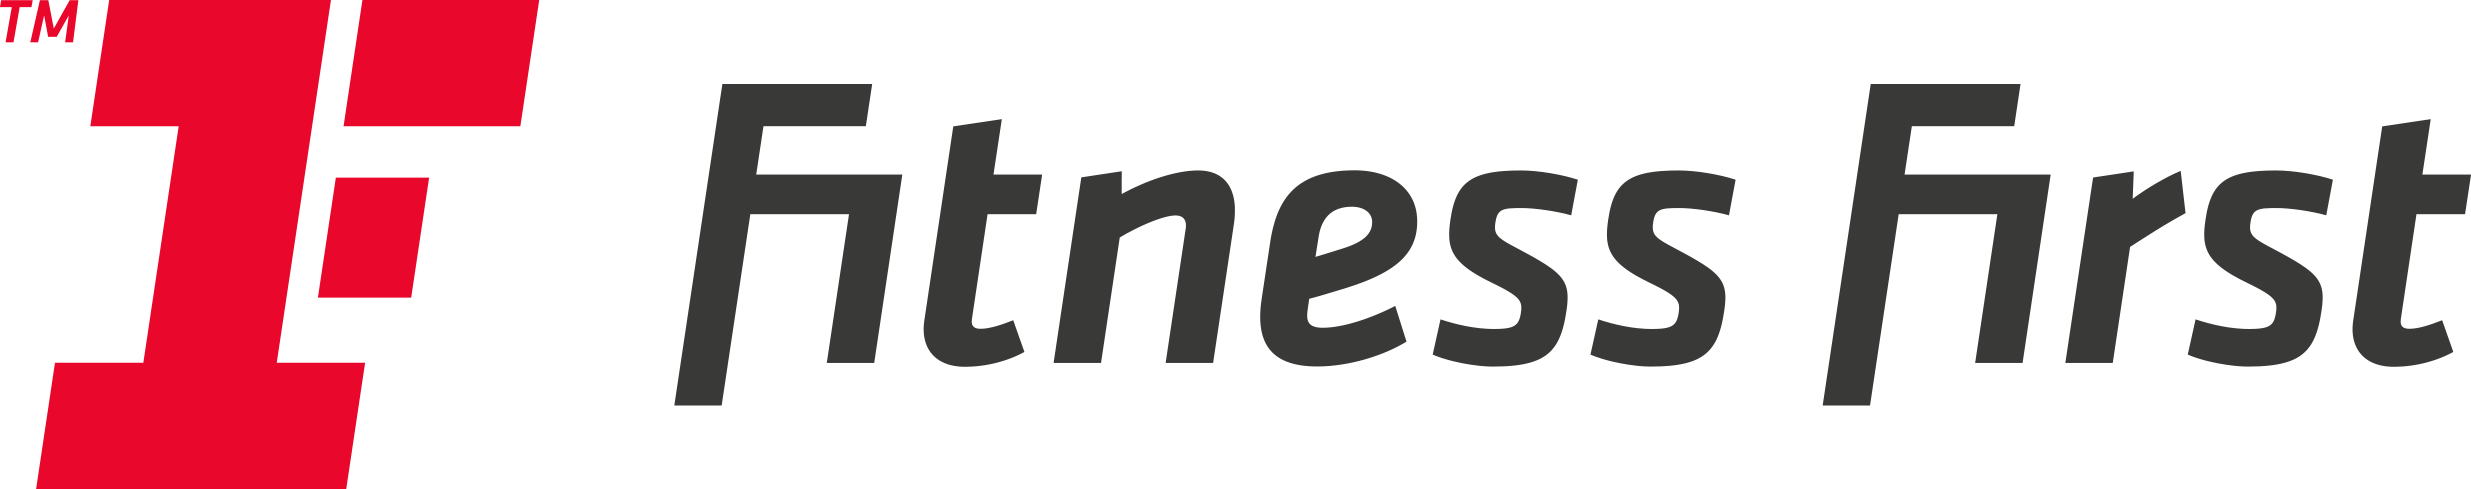 fitness-first-logo-png-15